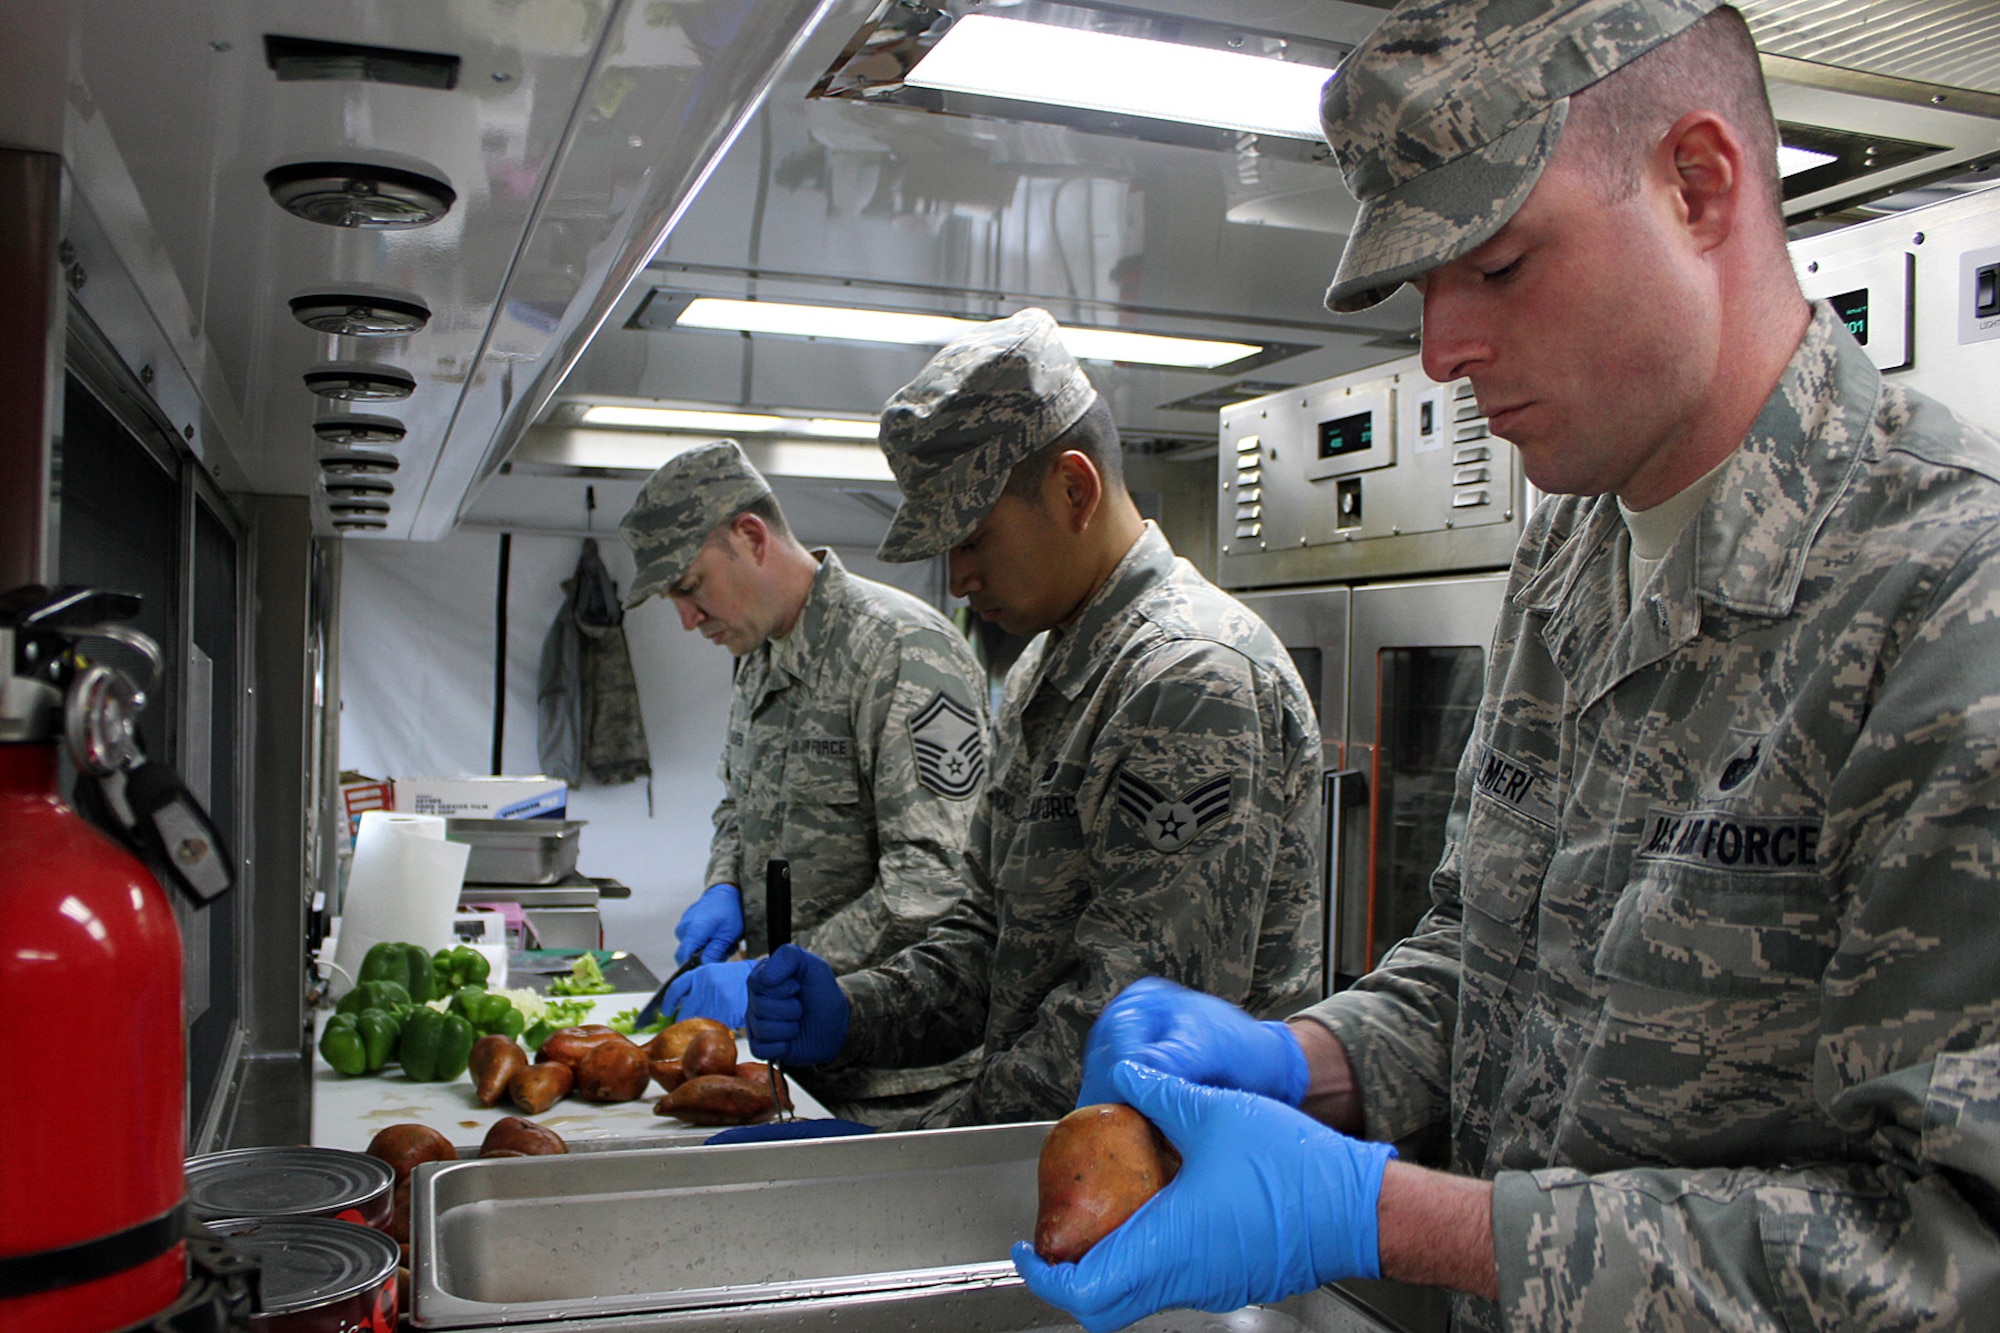 140528-Z-VA676-016  Senior Master Sgt. James Alves, Senior Airman Anthony Hammond and Technical Sgt. Ken Palmeri prepare dinner utilizing a Disaster Relief Mobile Kitchen Trailer at Camp Hinds Boy Scout camp, Raymond, Maine, May 28, 2014. The Airmen are part of an Innovative Readiness Training mission at the camp, which allows military personnel to get training in various tasks and a community organization, in this case the Boy Scouts, to benefit from the work. Air National Guard, Marine and Army Reserve units from about a dozen different states will be working on a construction project at the camp during summer 2014. Alves and Palmeri are Services specialists with the 127th Force Support Squadron, Michigan Air National Guard. Hammond is with the 143rd FSS, Rhode Island ANG. (U.S. Air National Guard photo by Technical Sgt. Dan Heaton)